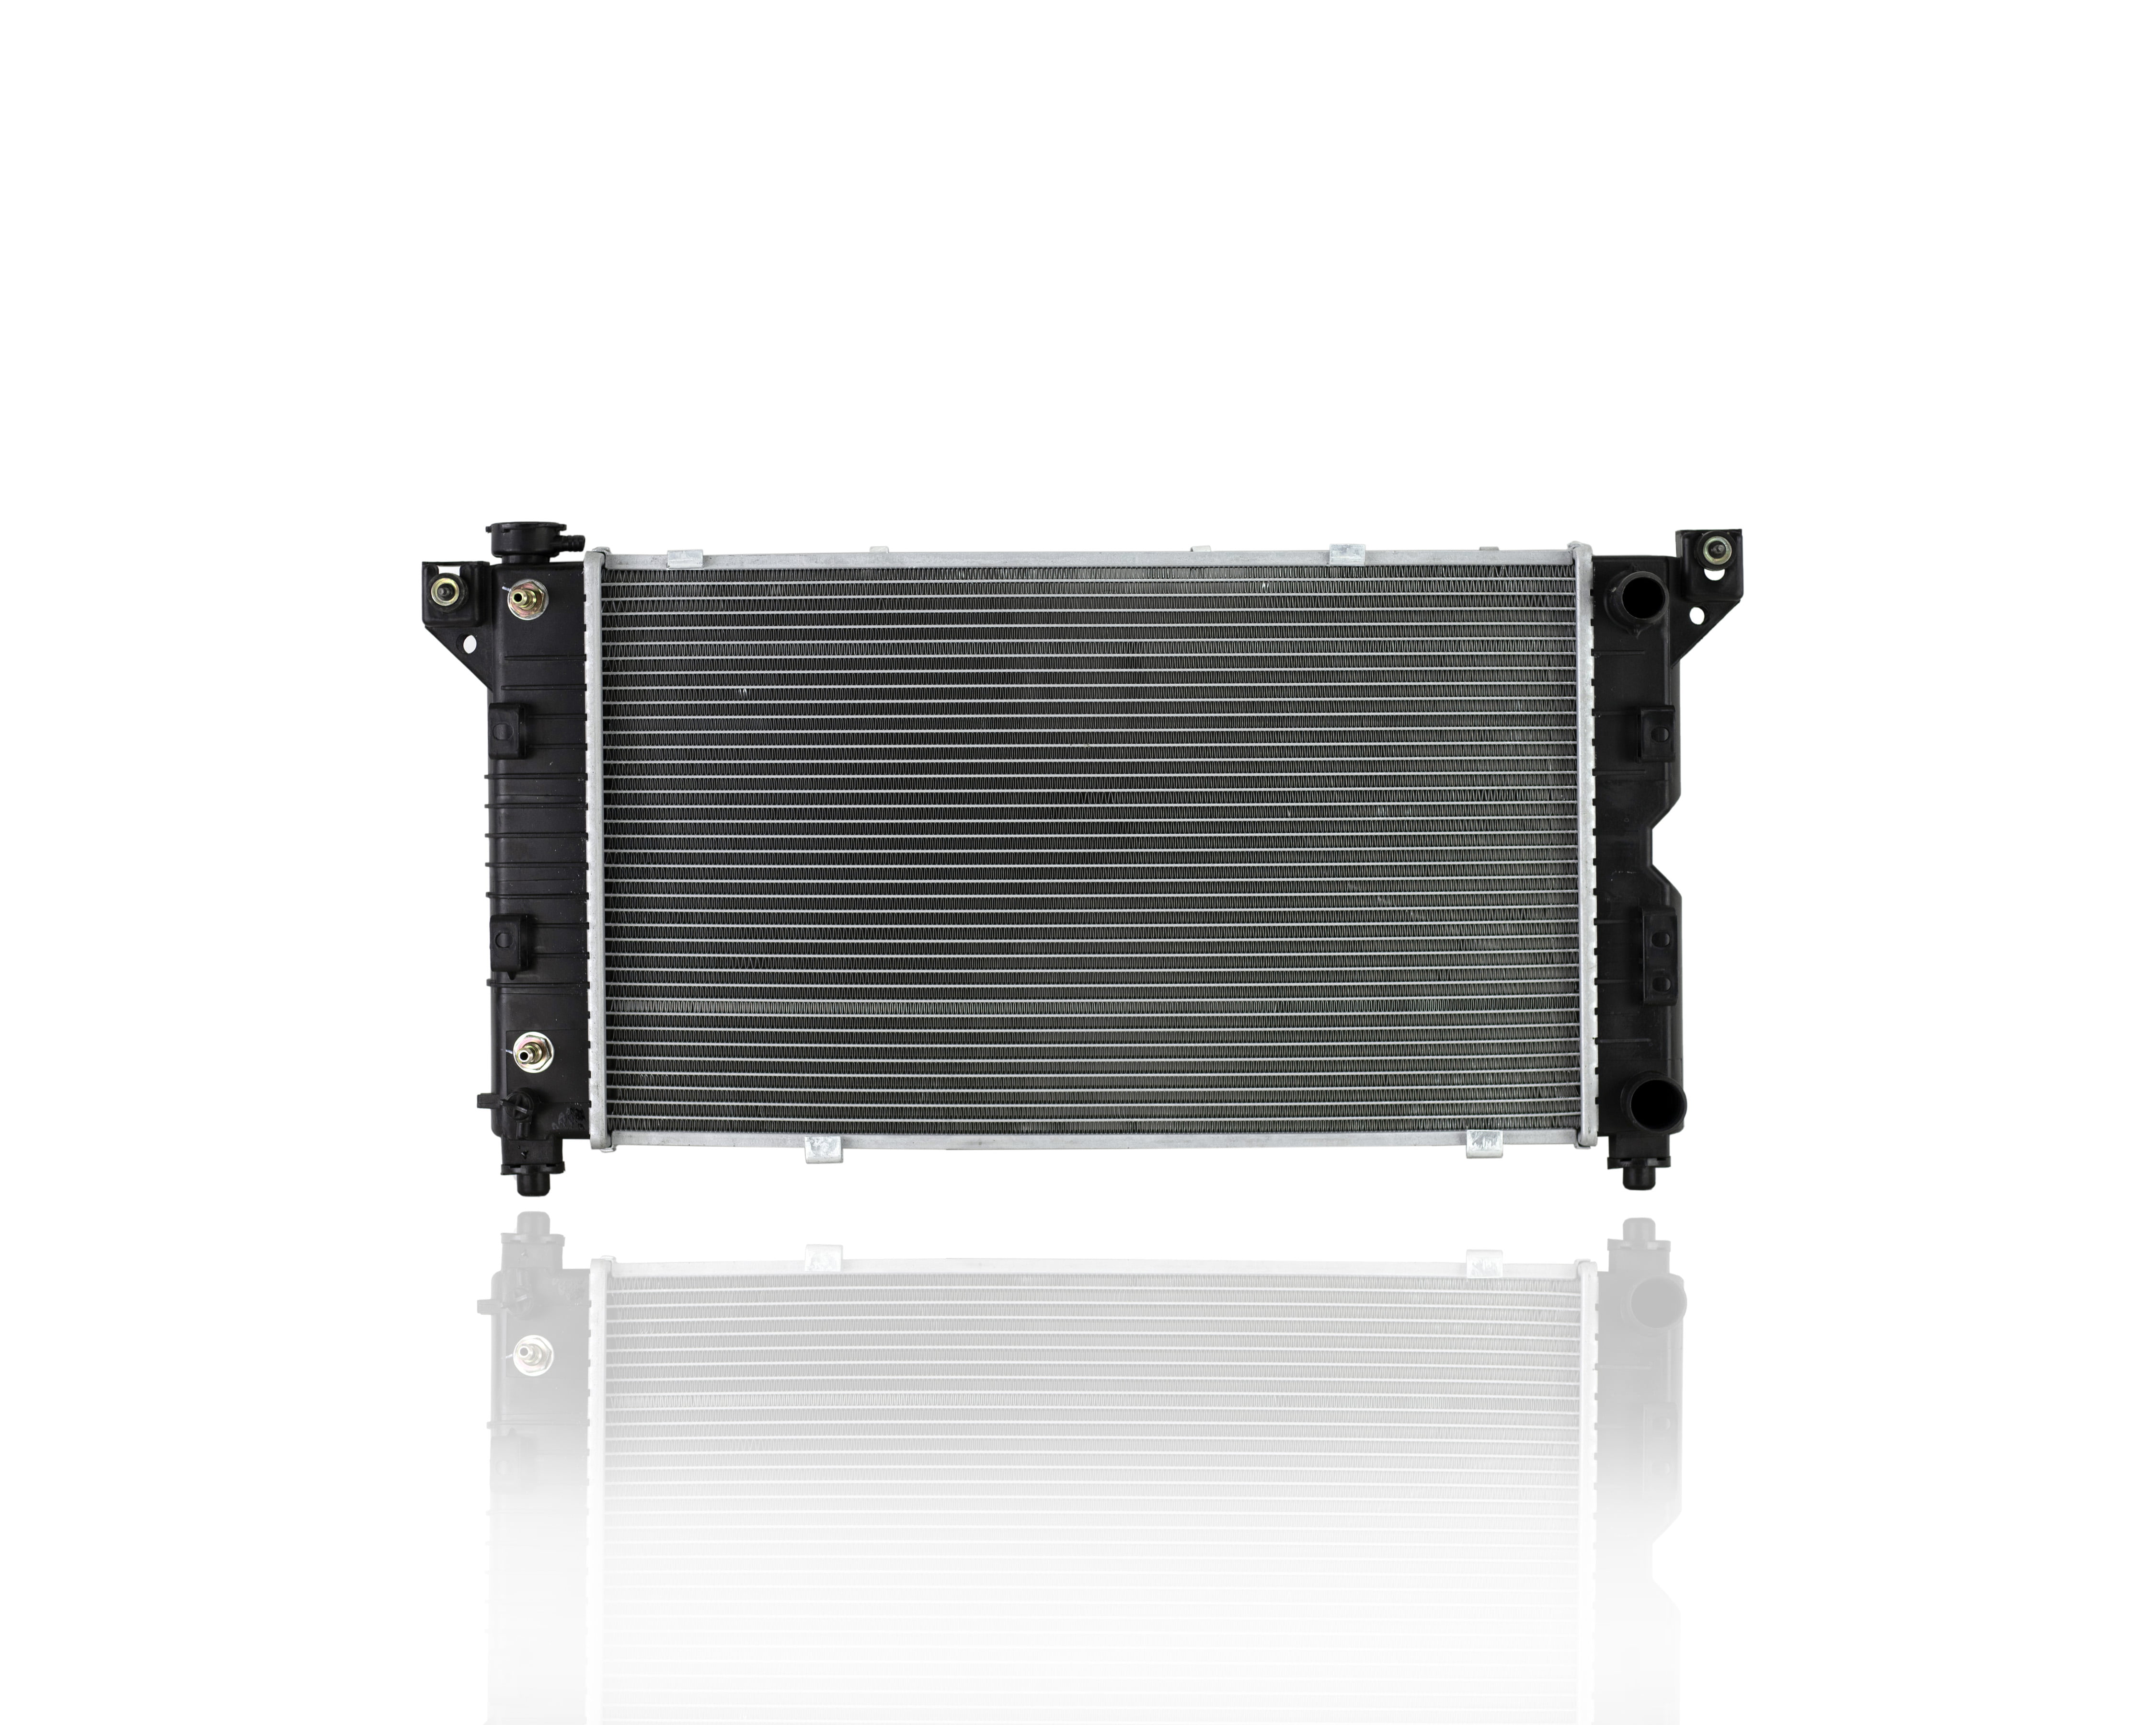 Radiator Pacific Best Inc For/Fit 1850 96-00 Dodge Caravan Chrysler Voyager Town & Country Standard Duty w/o Rear AC 